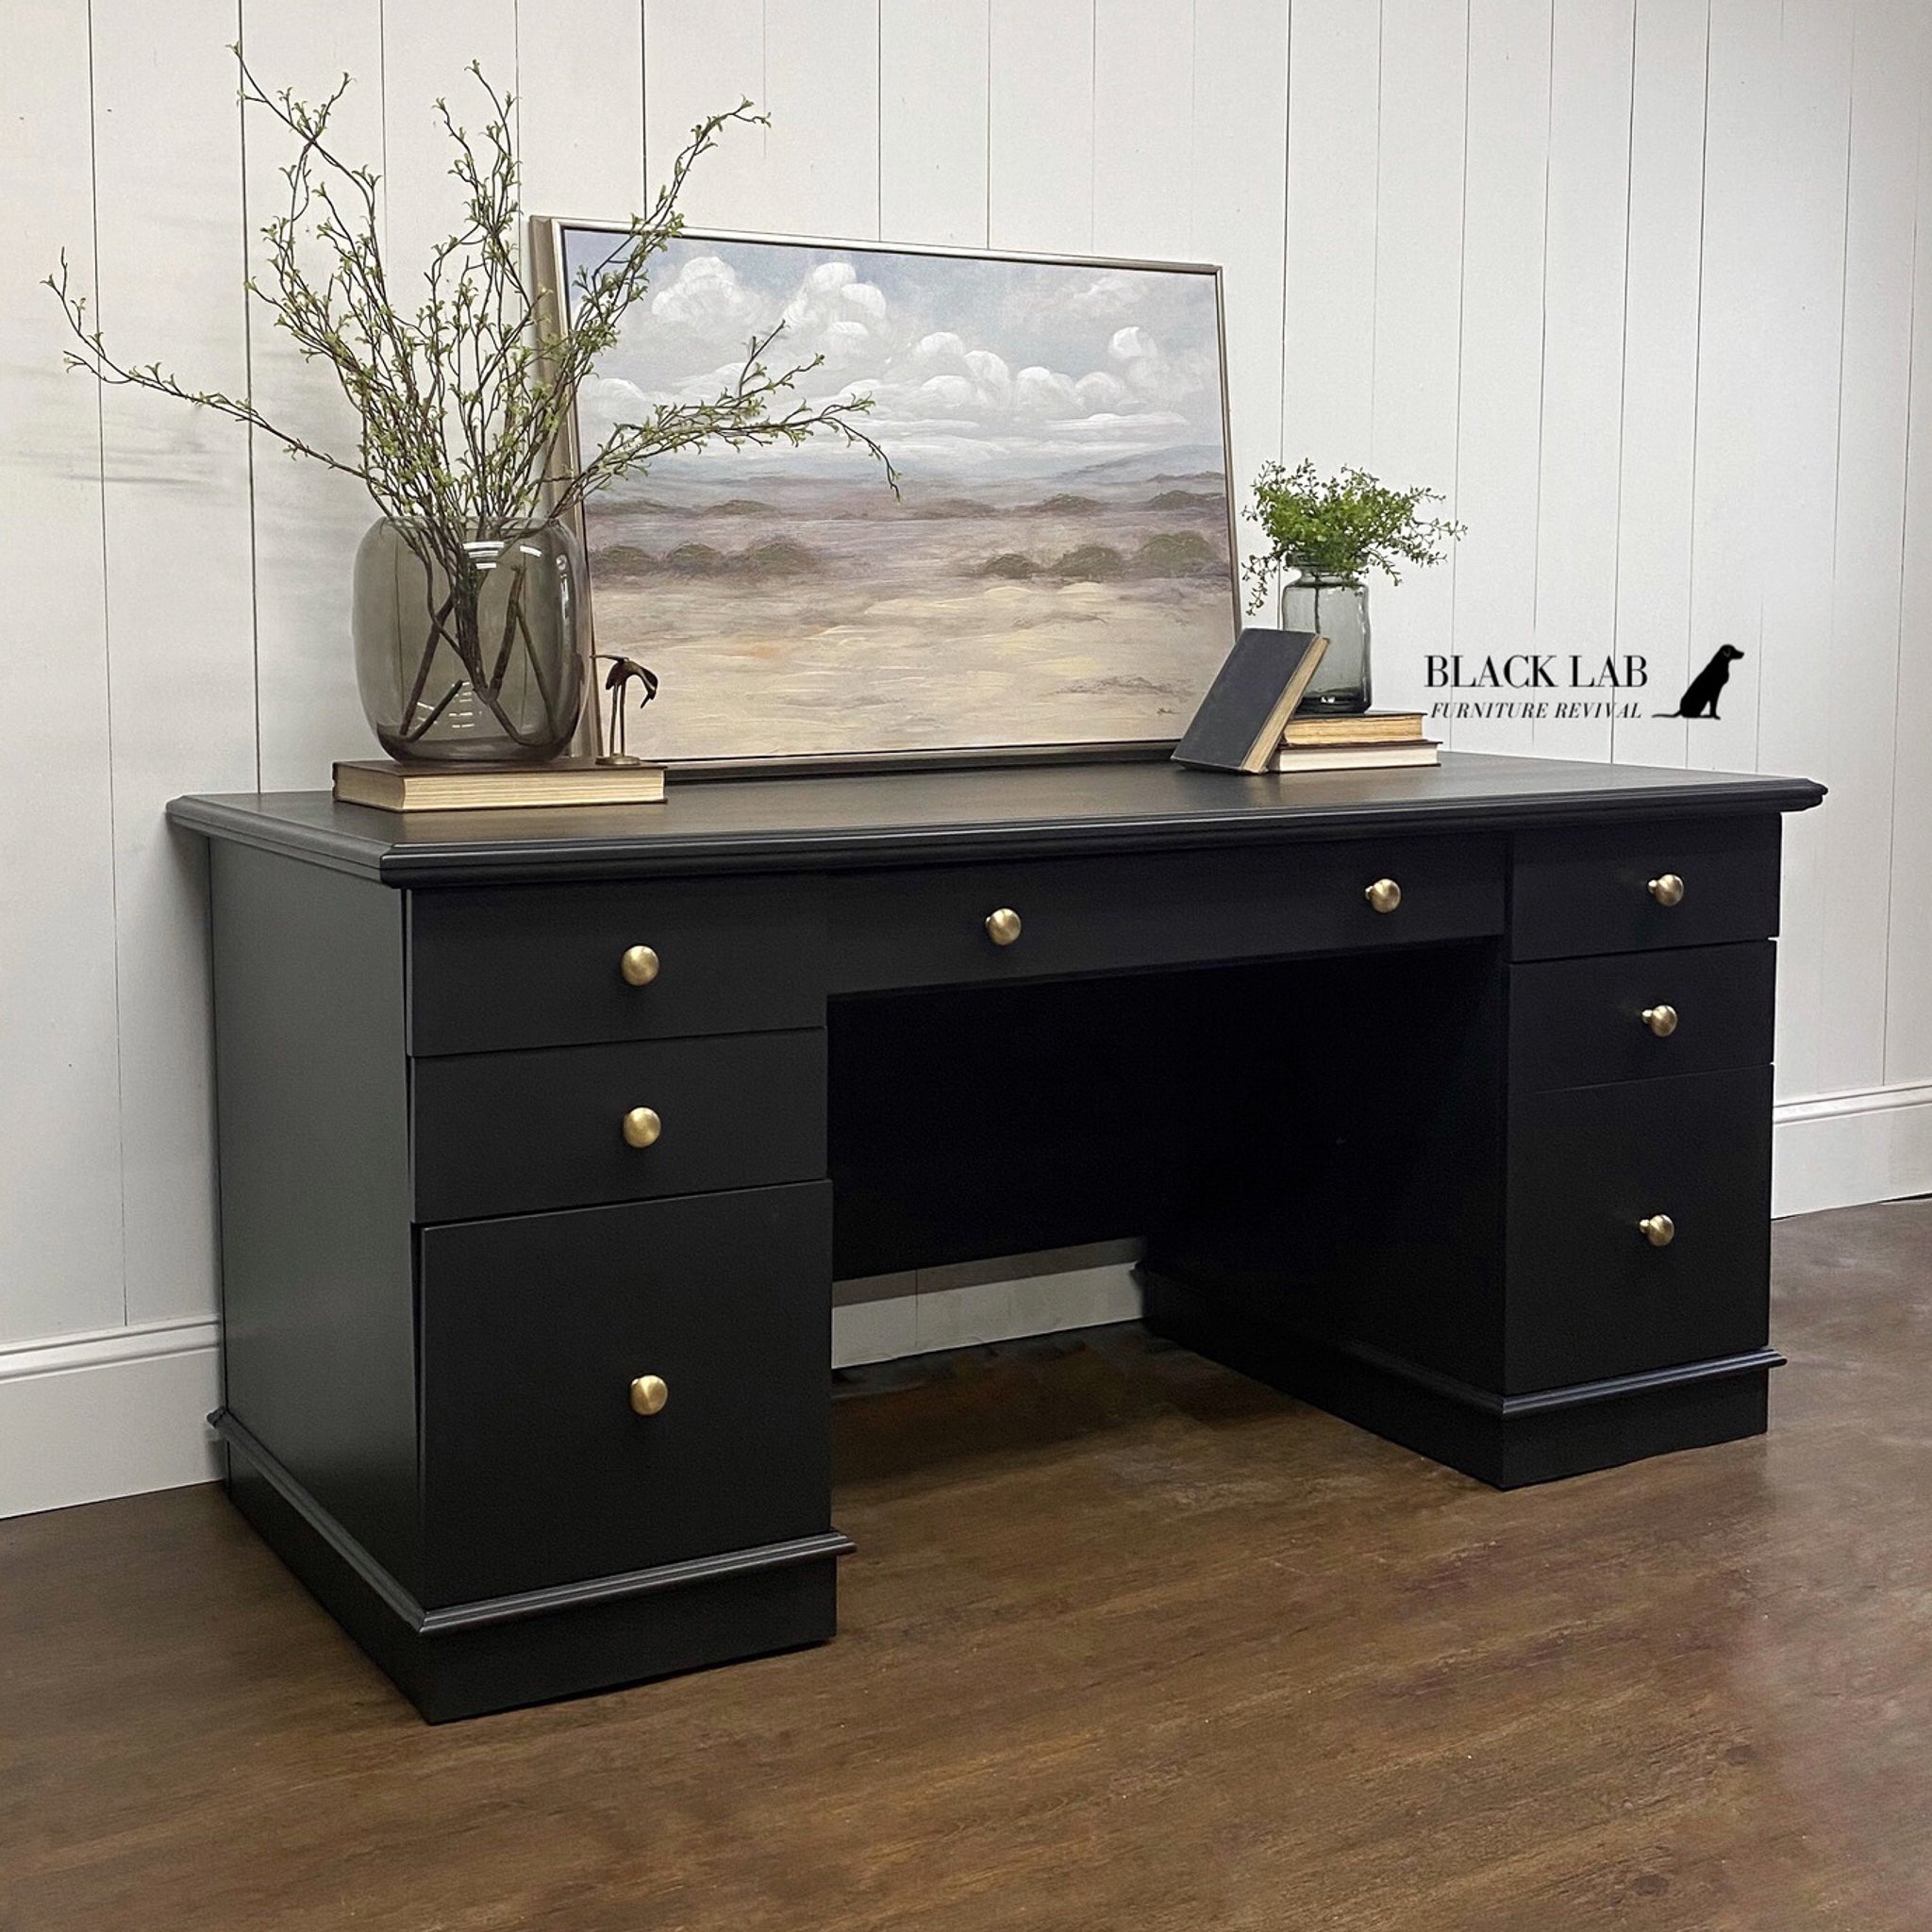 A large office desk refurbished by Black Lab Furniture Revival is painted in Dixie Belle's Caviar chalk mineral paint.